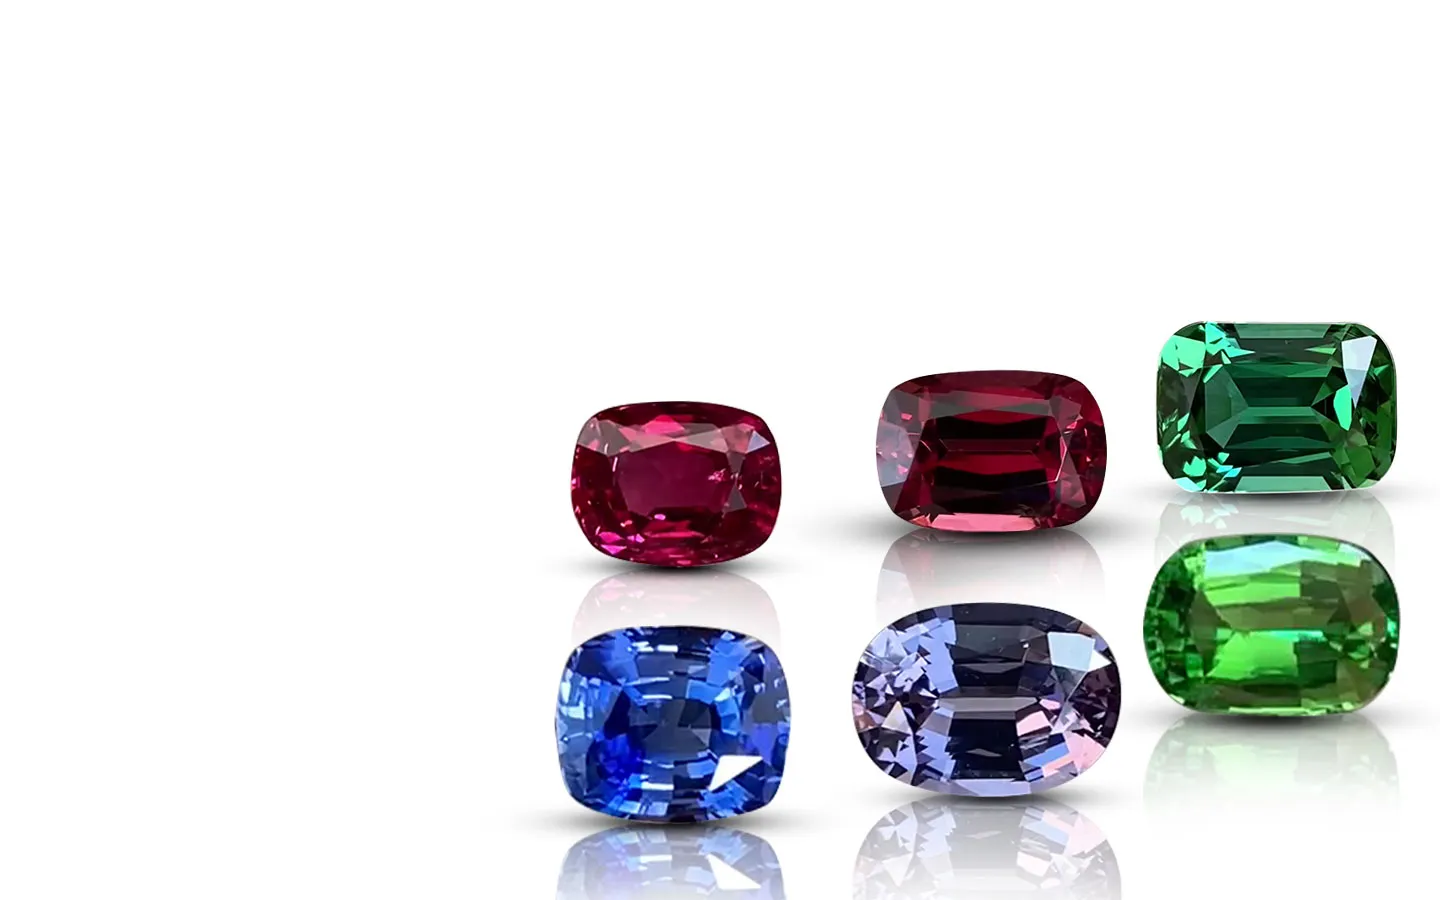 We have curated an impressive collection of only the best gemstones of exceptional quality for your future jewelry pieces